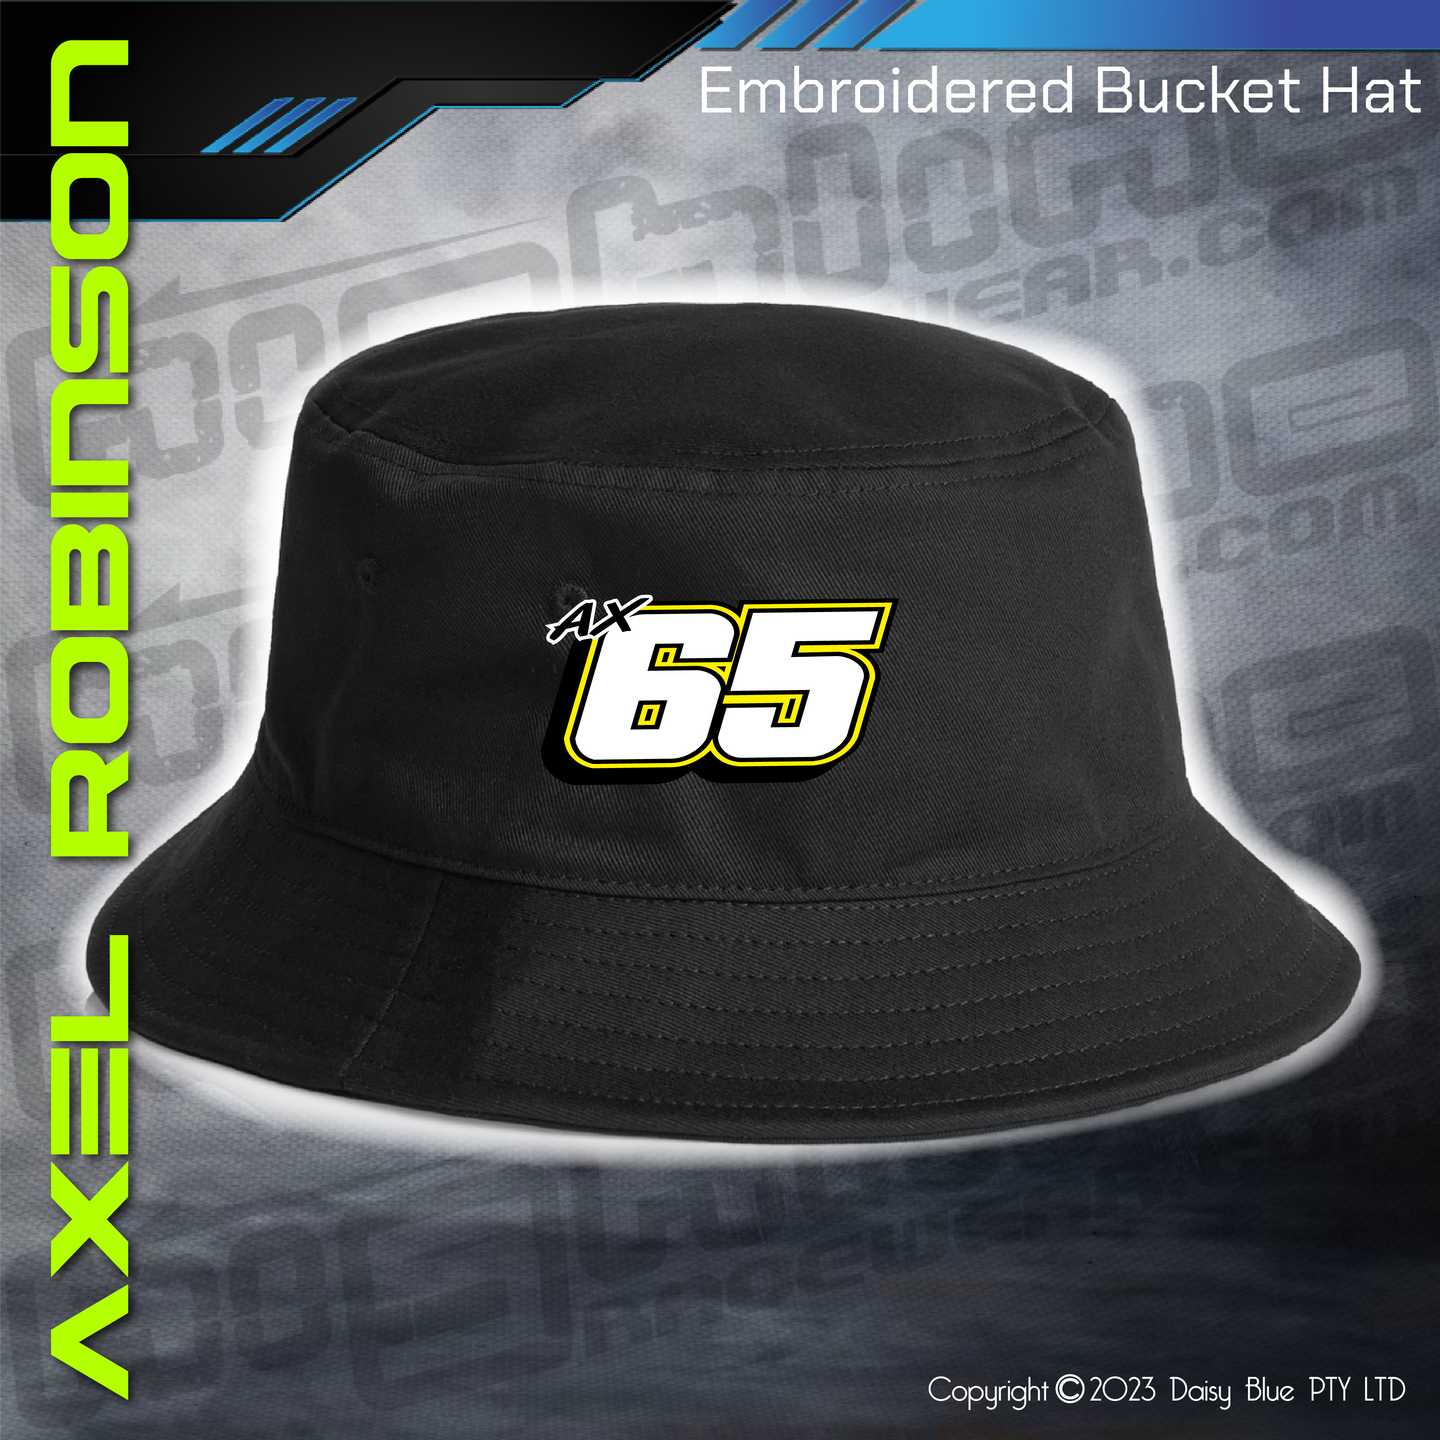 Embroidered Bucket Hat - Axel Robinson